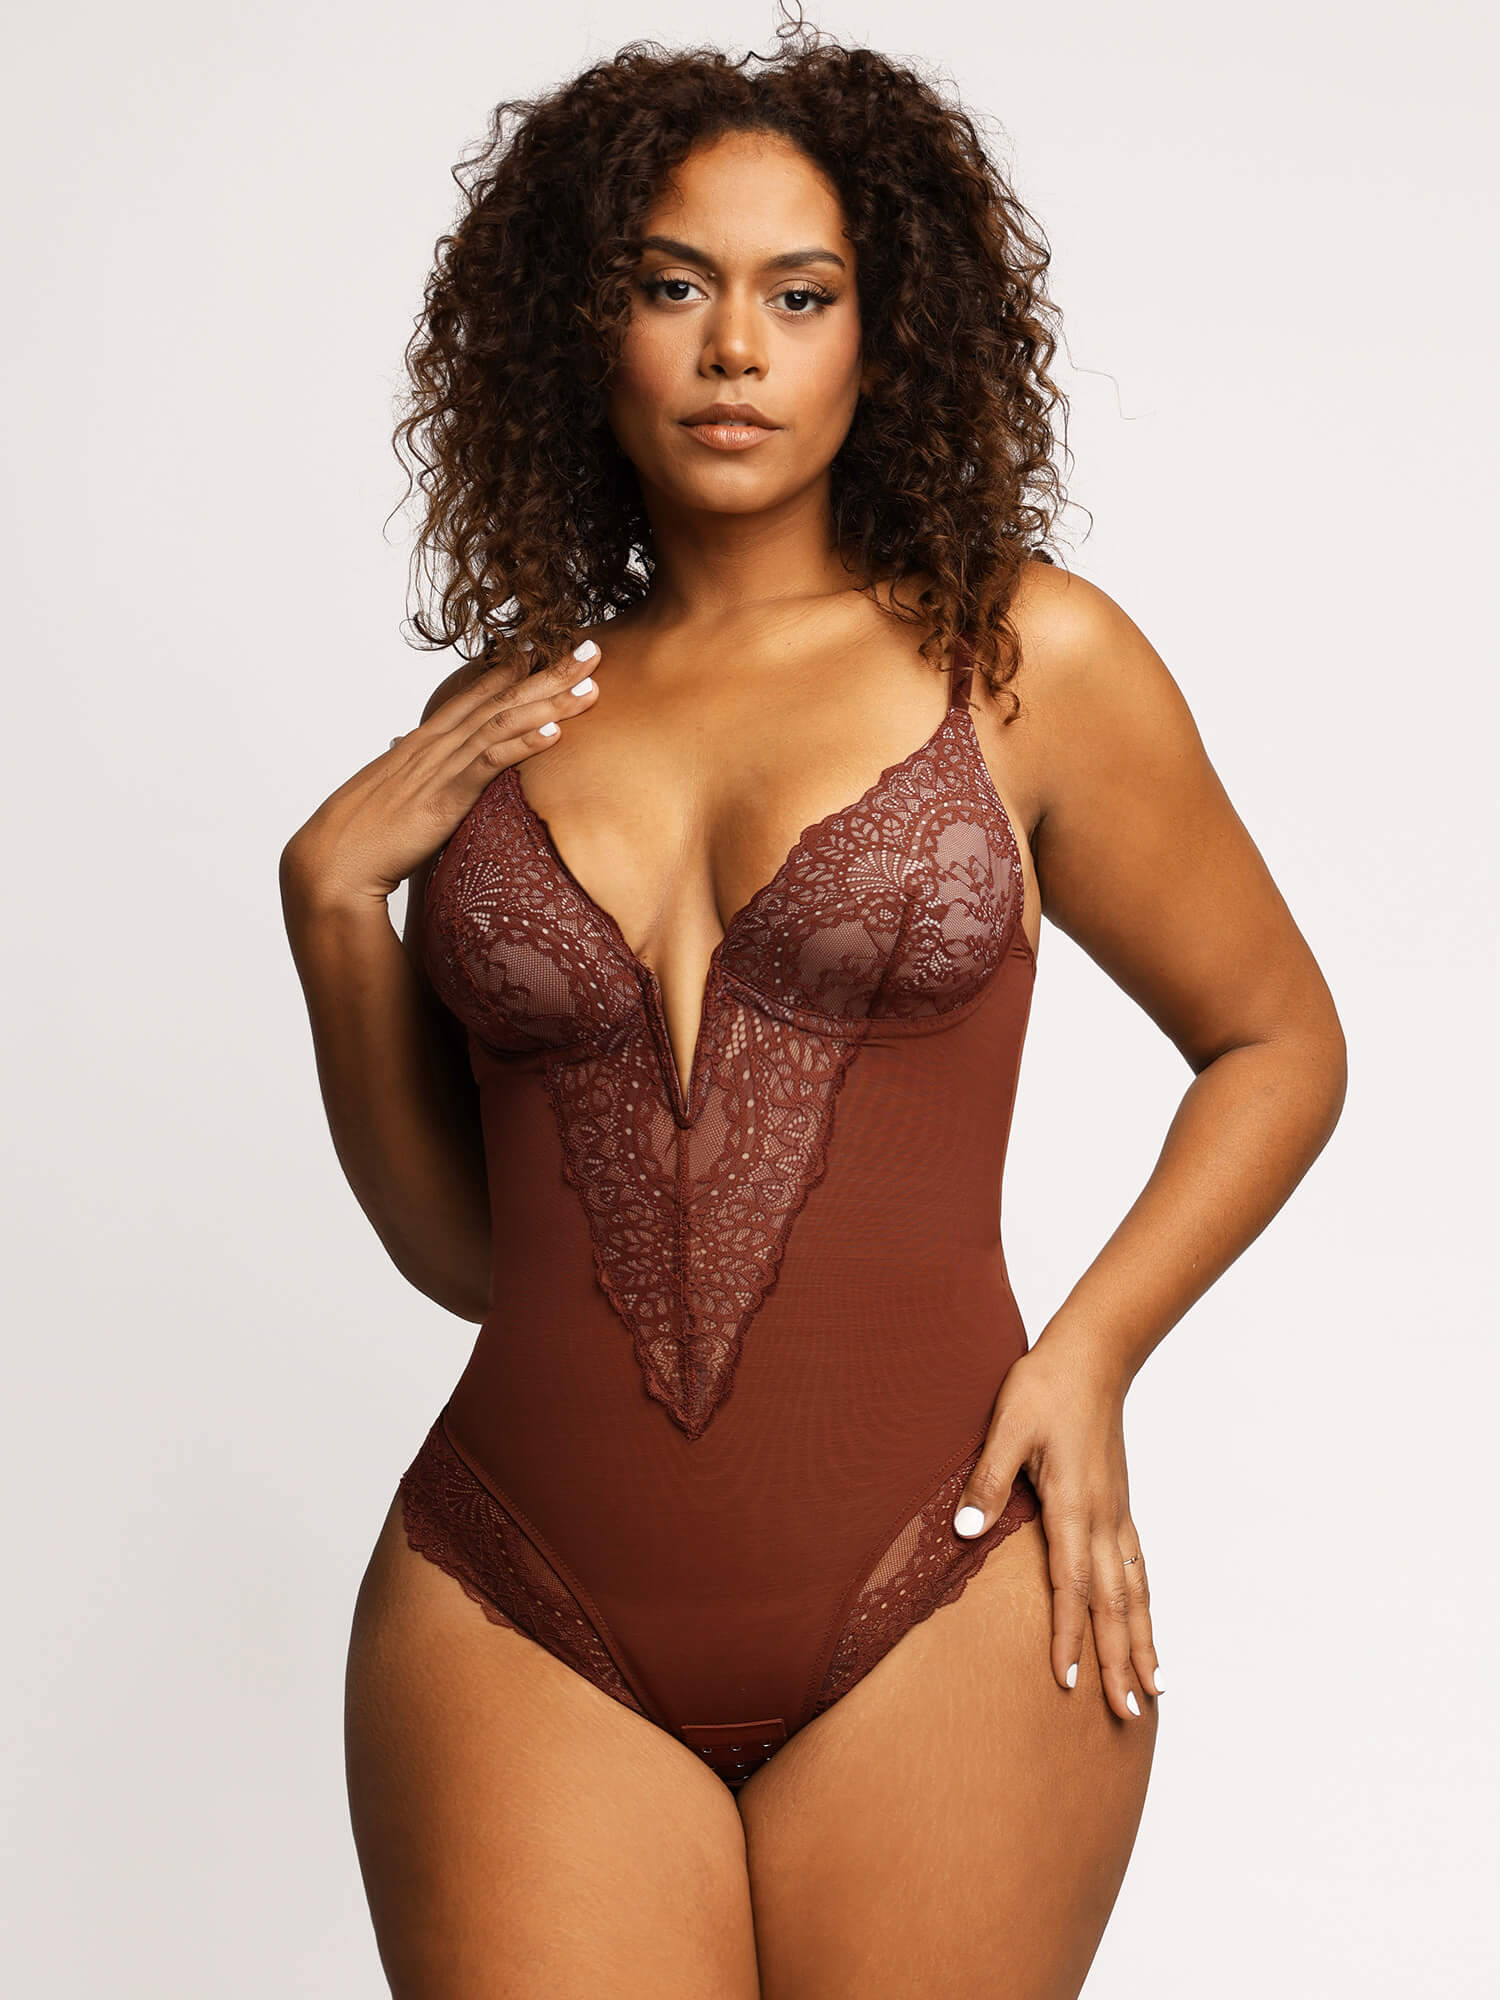 The Deep-V Neck Lace Thong Shapewear Bodysuit offers shaping for a flattering silhouette.